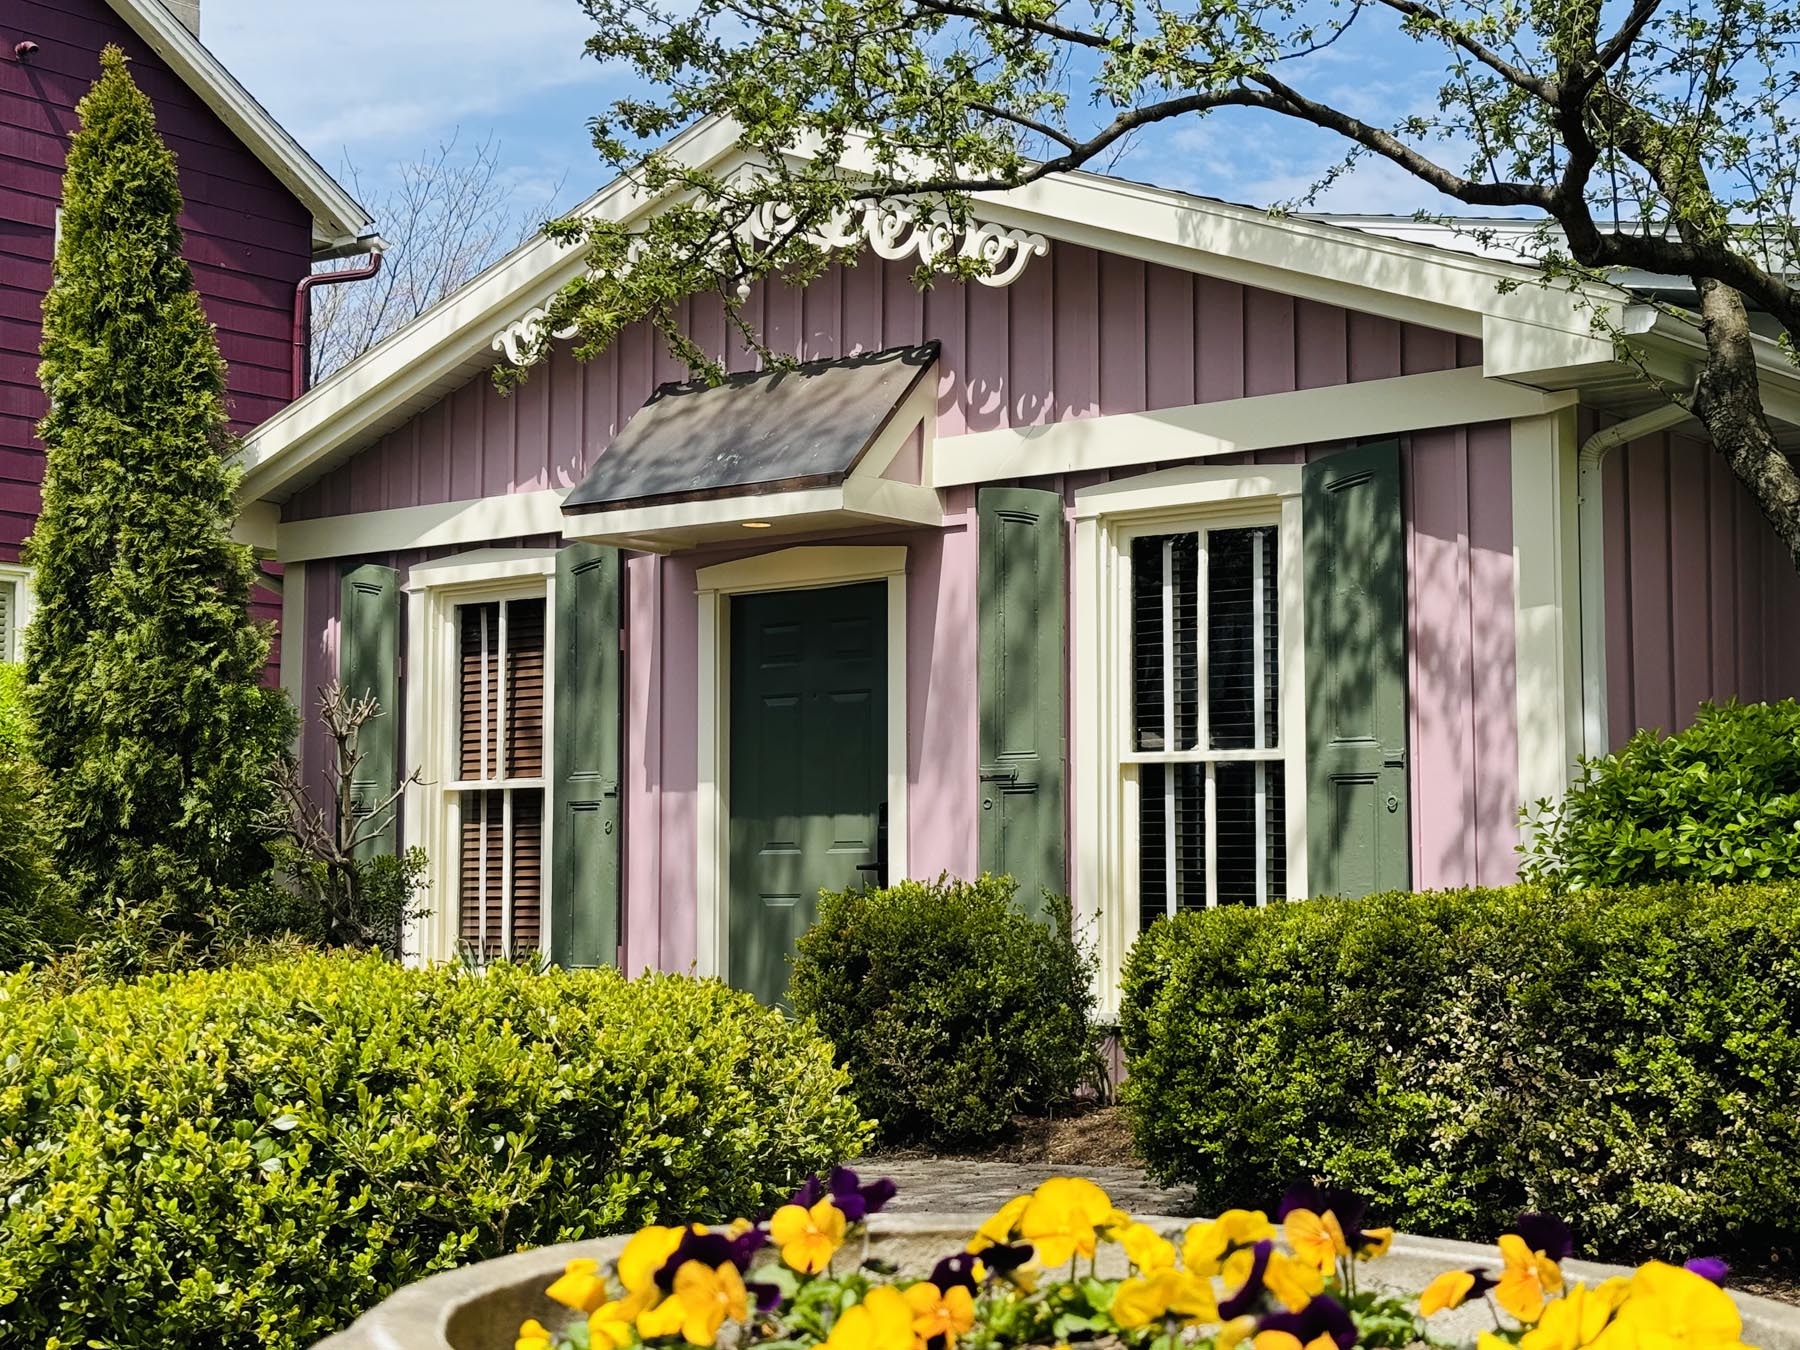 Exterior of pink cottage